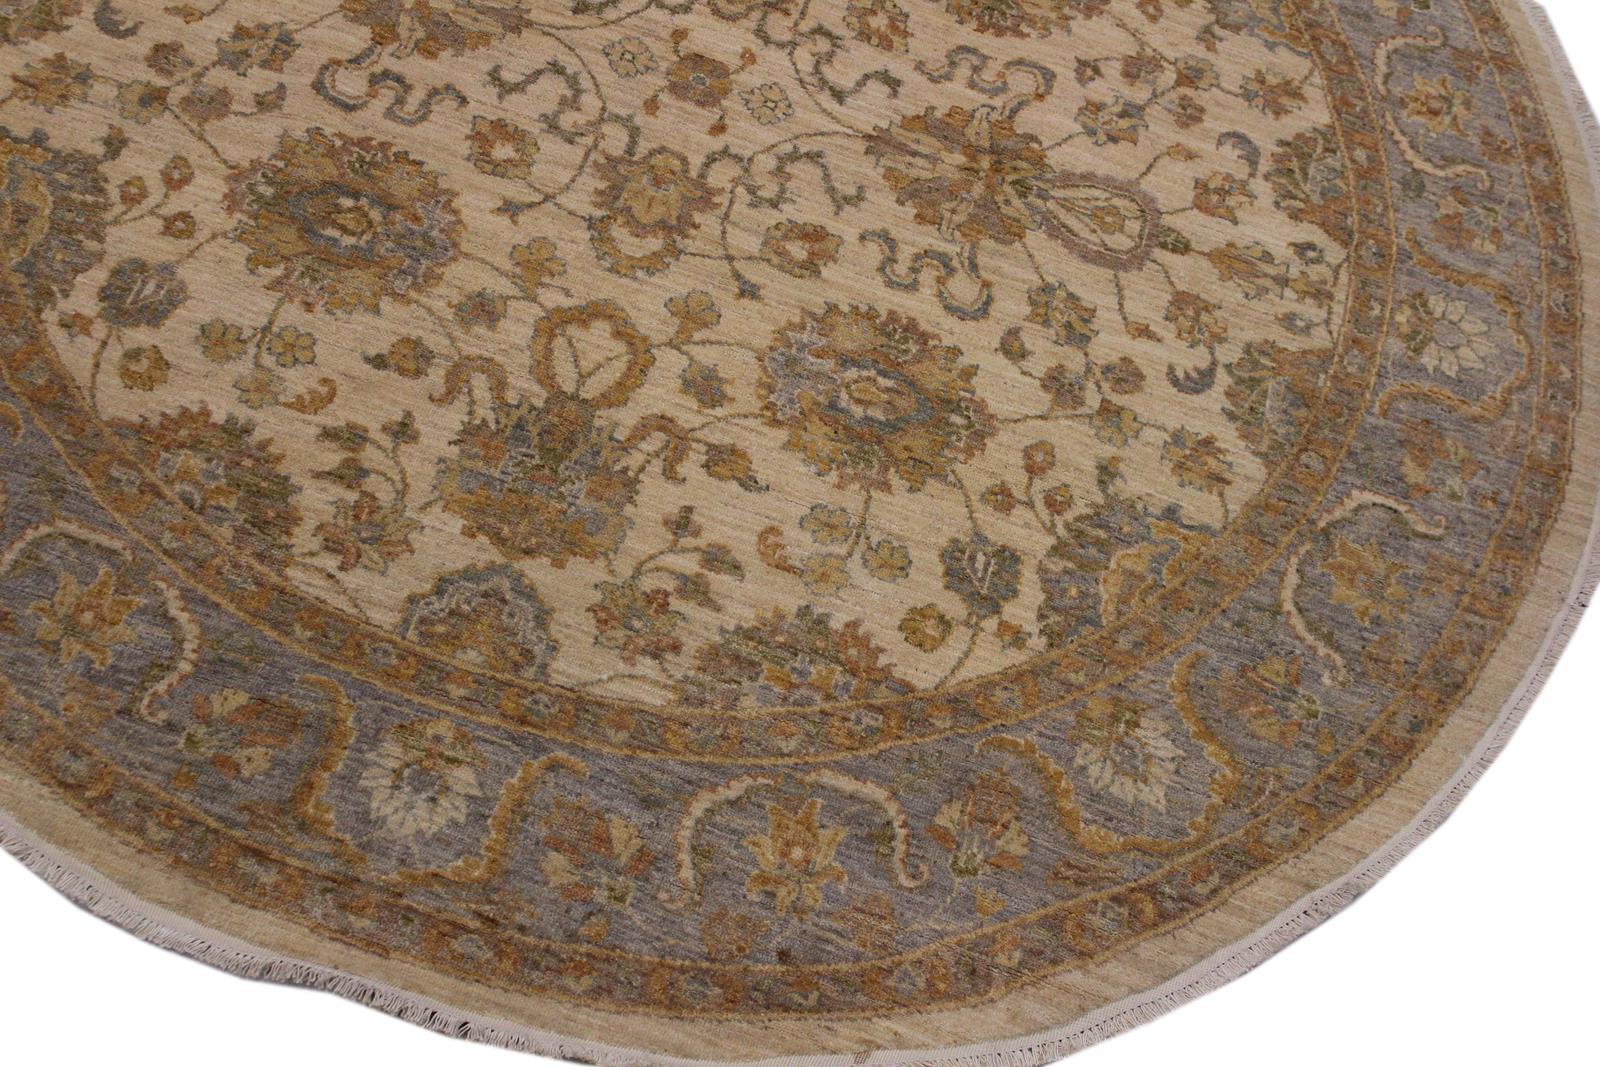 A11783 711"x 8 1"Traditional                   8x8NaturalGREYHand-knotted                  Pakistan   100% Wool  Round      652671215254